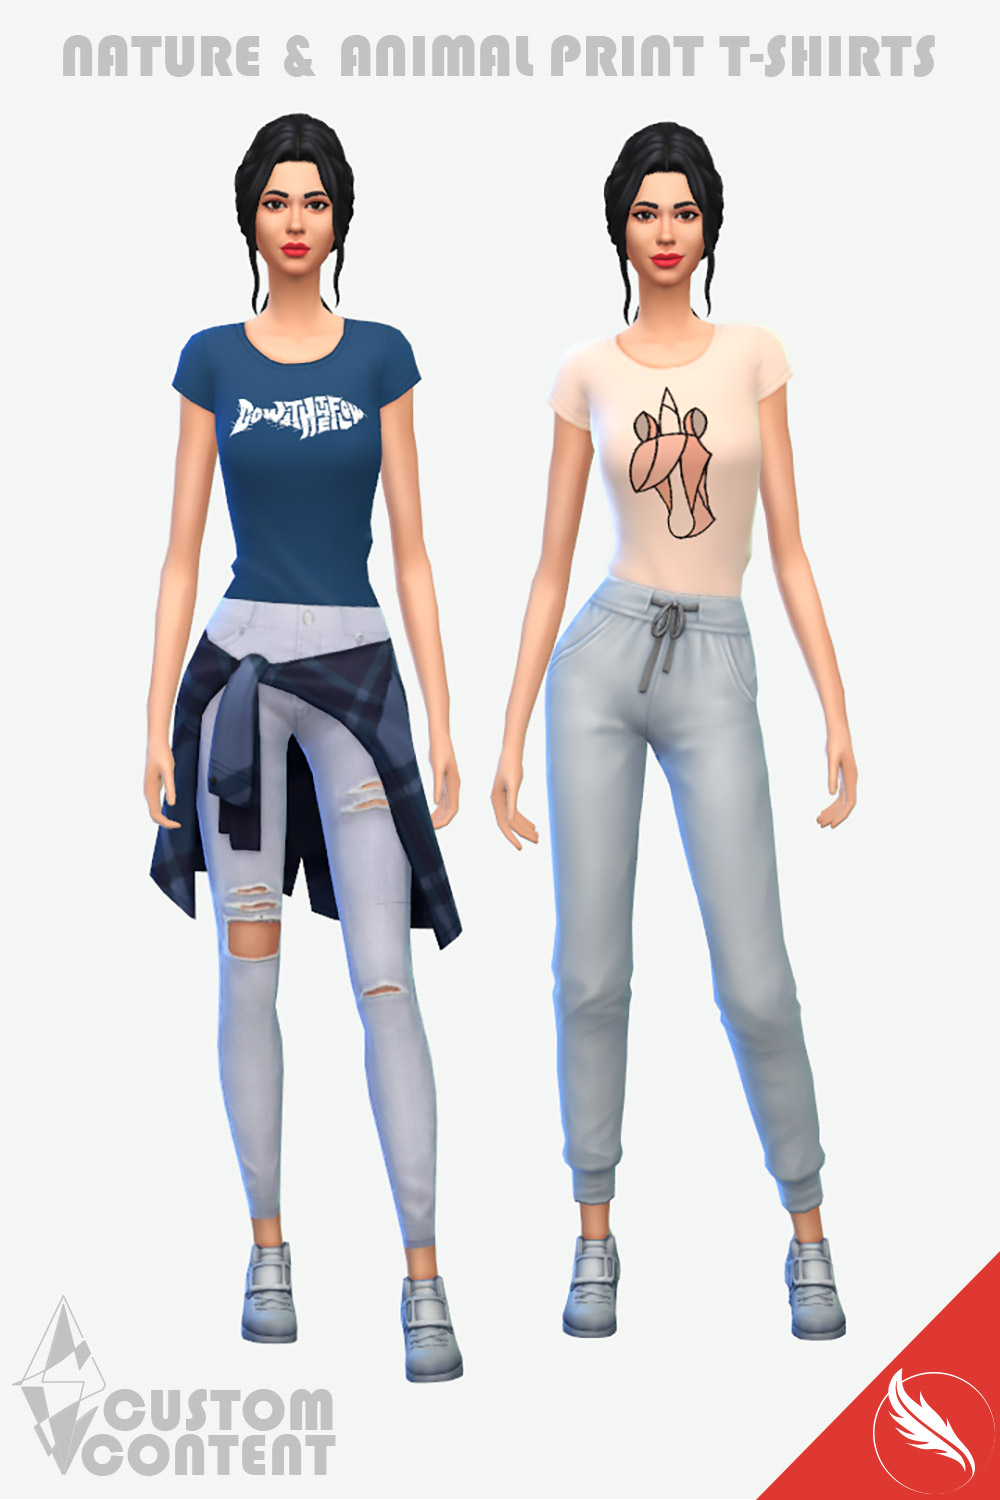 The Sims 4 T-Shirts